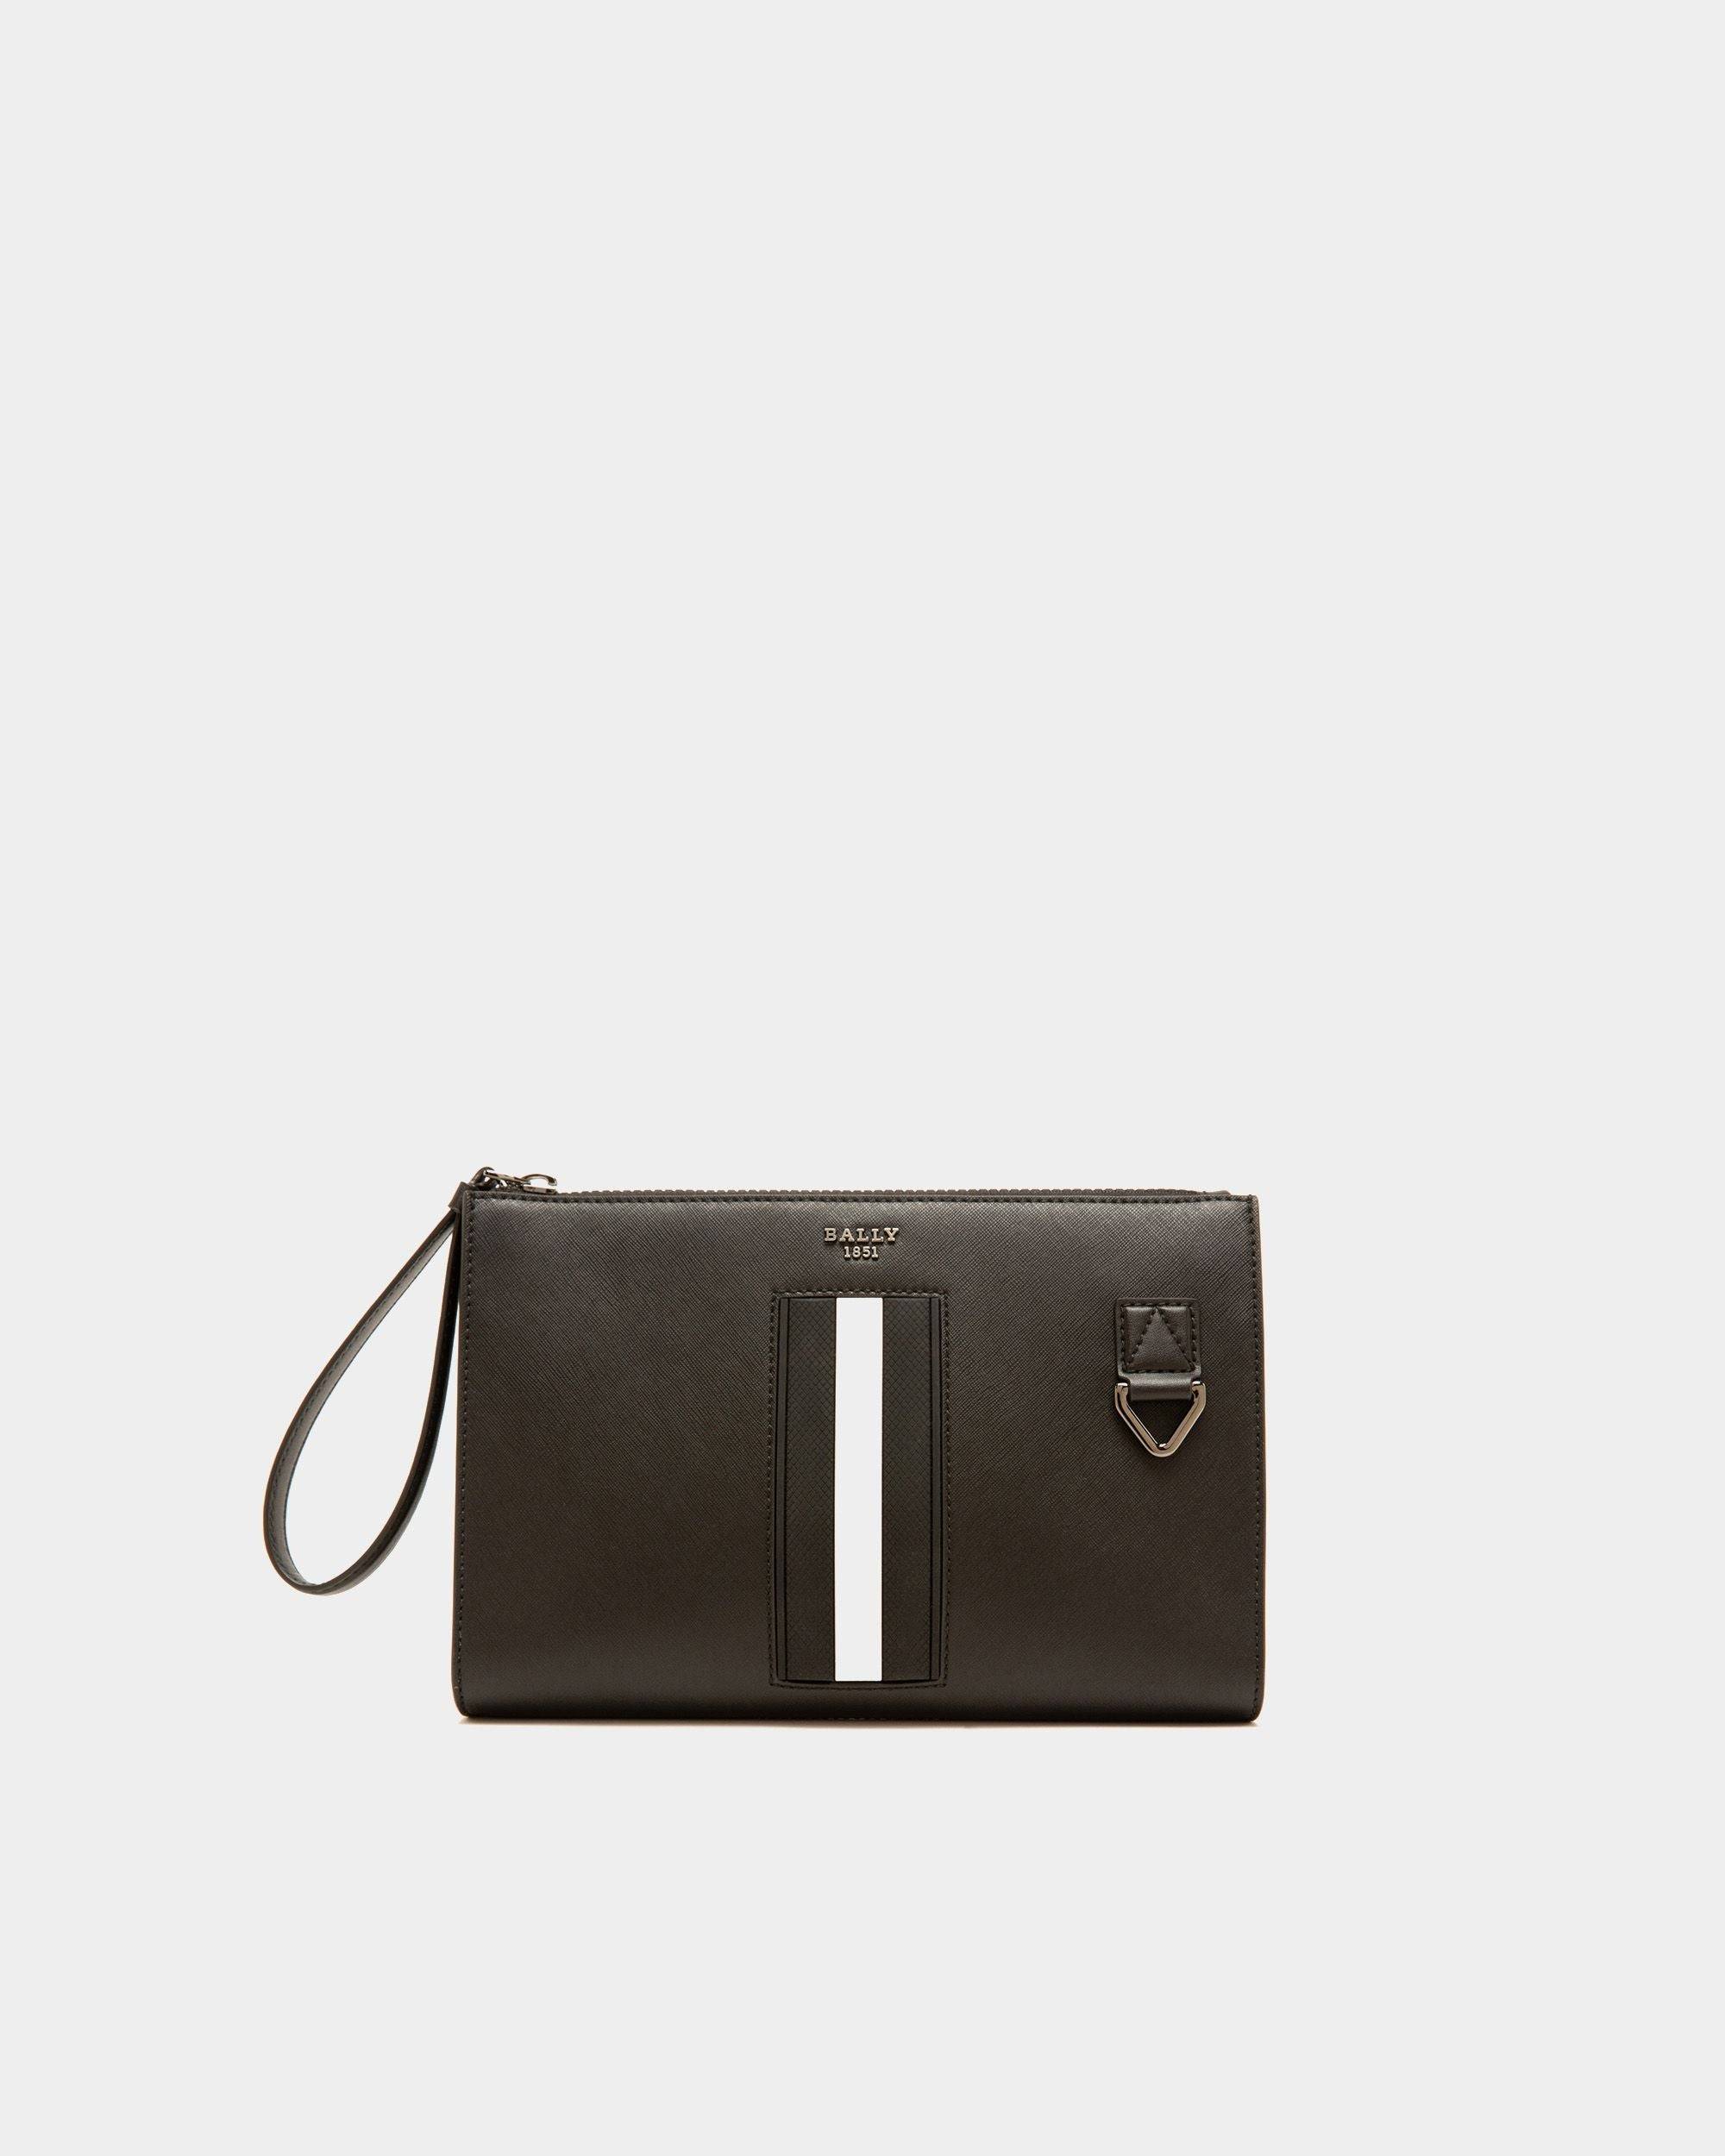 Men's Mythos Clutch In Black Leather | Bally | Still Life Front